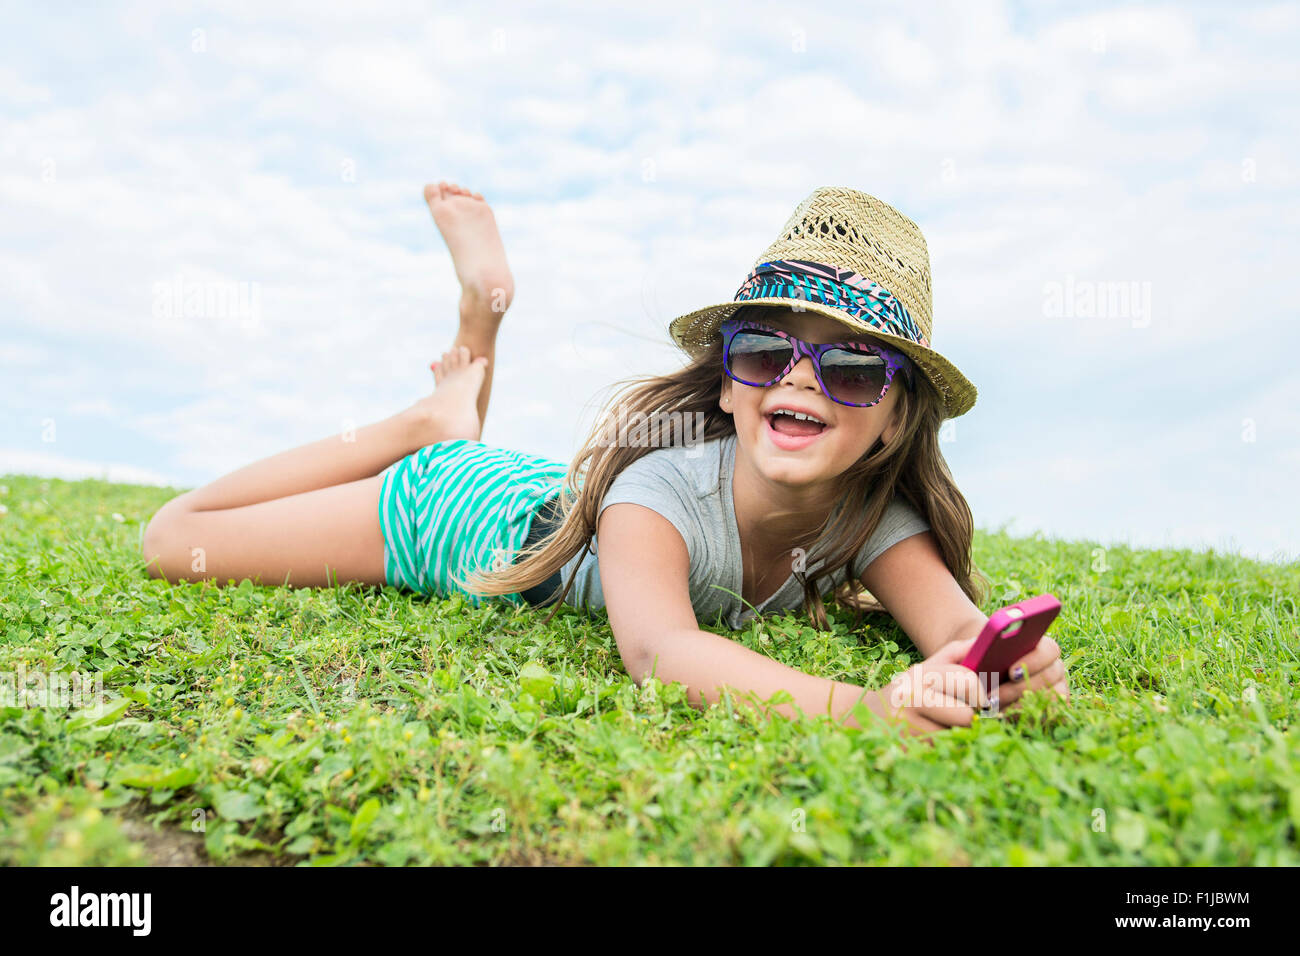 Beautiful portrait of a little girl outside on grass Stock Photo